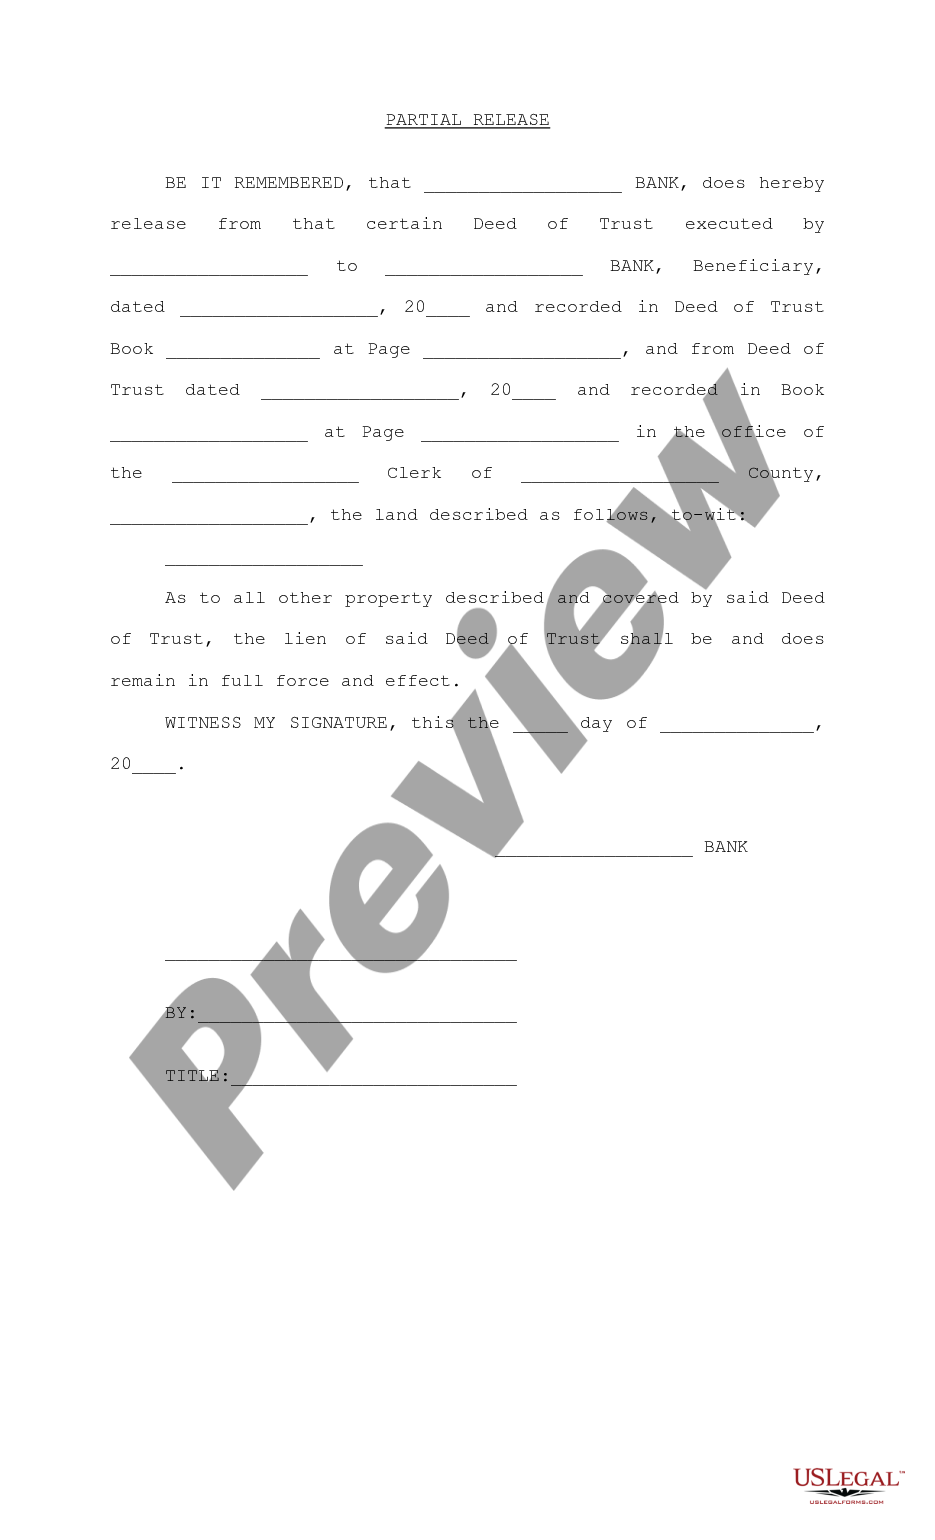 page 0 Partial Release of Deed of Trust preview